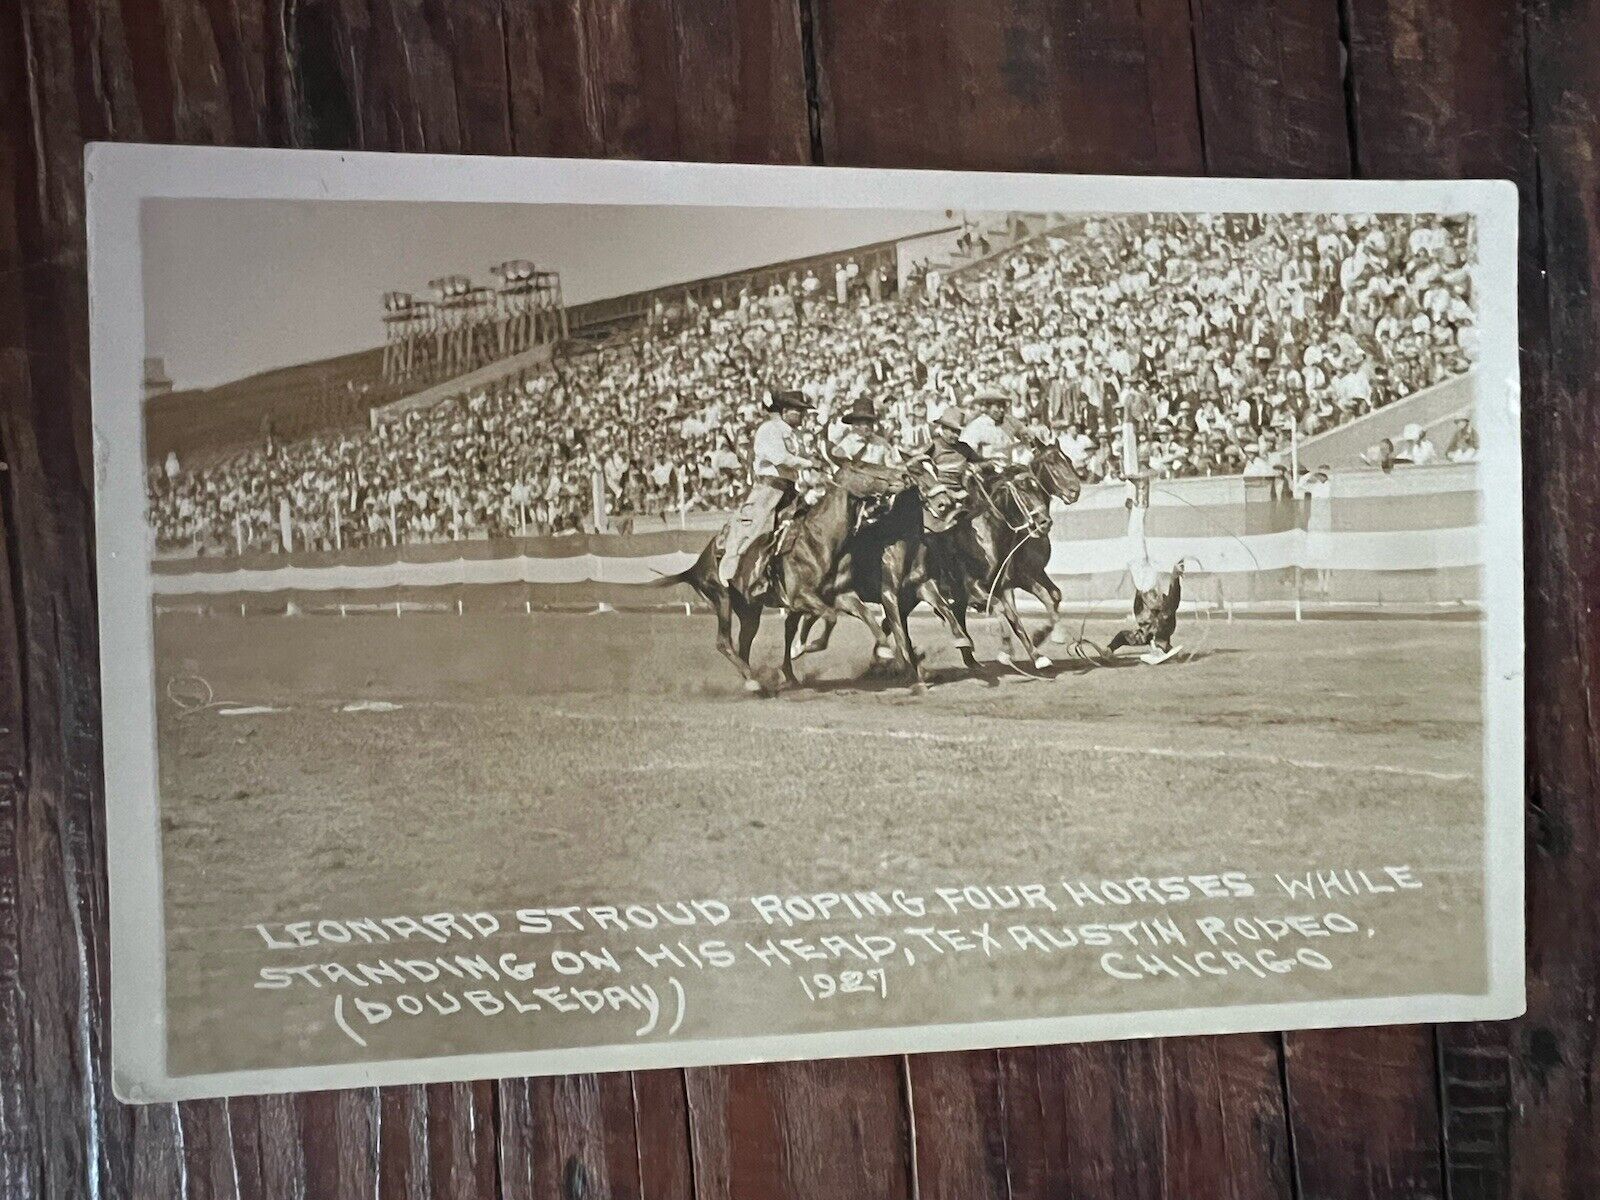 1927 Doubleday Real Photo Postcard - Trick Roping tex Austin Rodeo Chicago